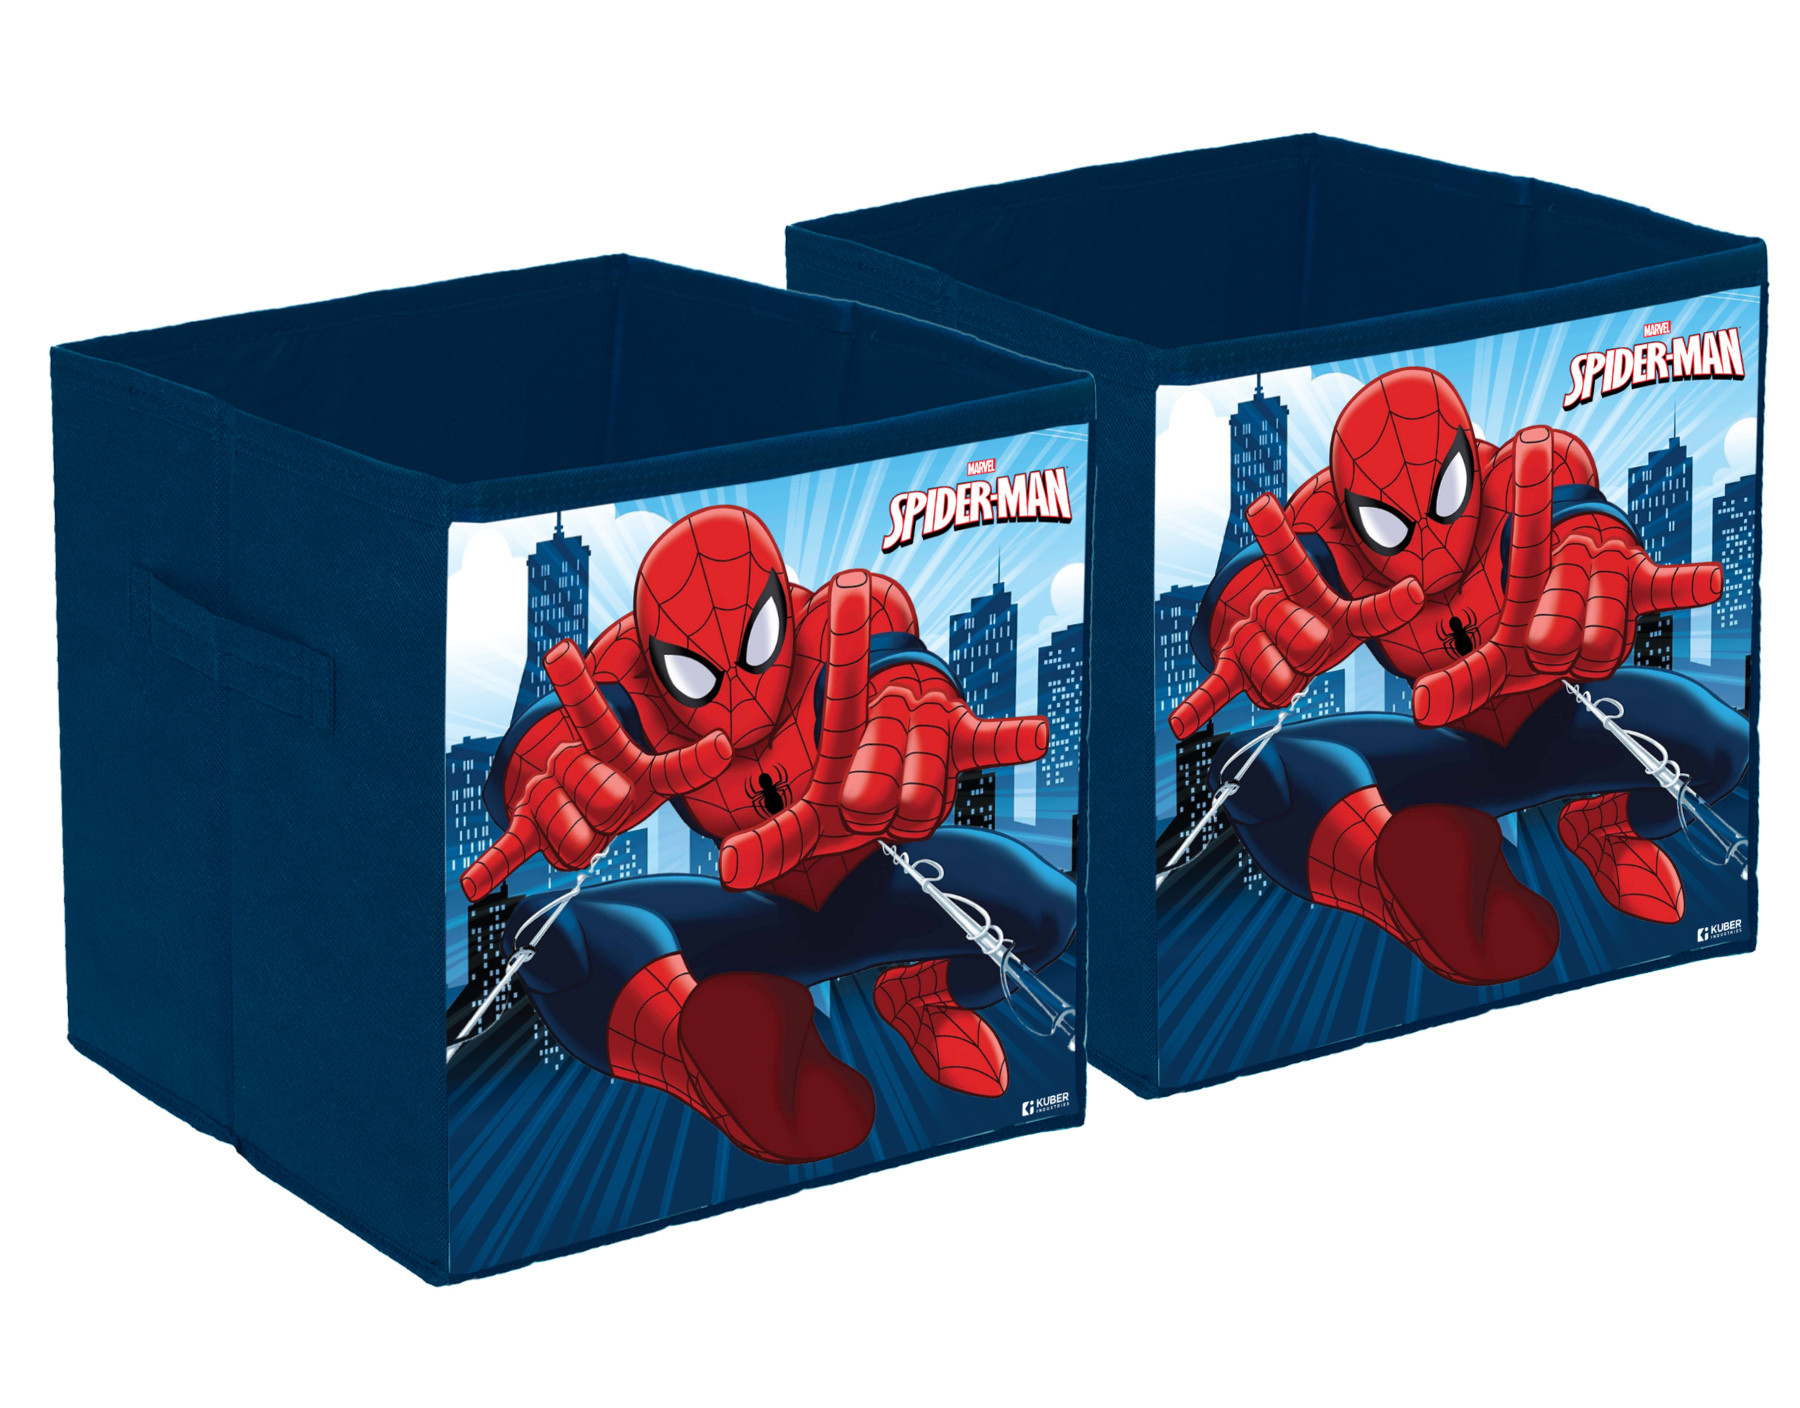 Kuber Industries Marvel Spiderman Print Durable & Collapsible Square Storage Box|Clothes Organizer With Handle,.(Navy Blue)